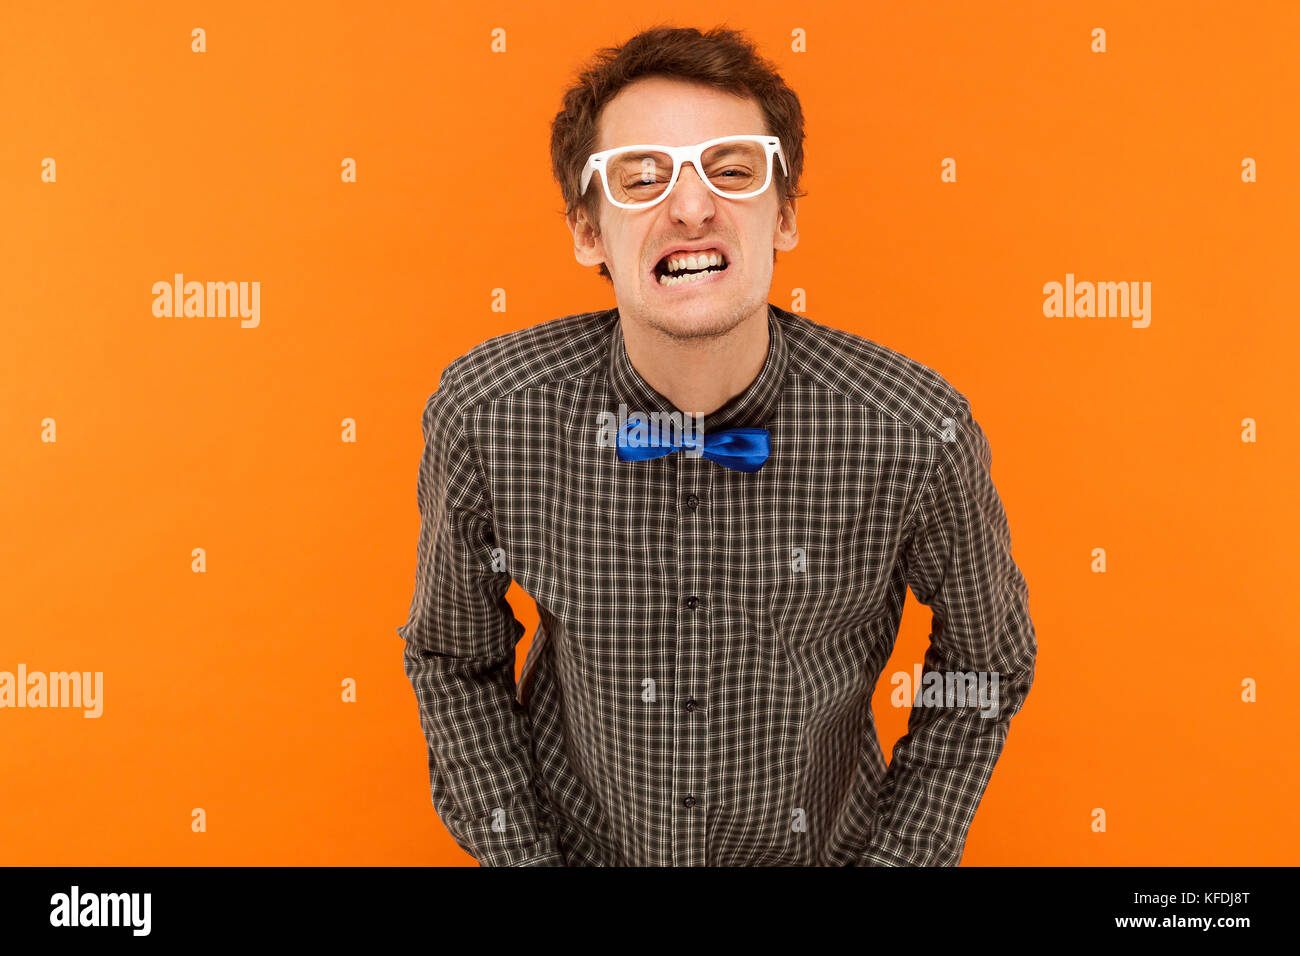 Anger stupid man looking at camera and showing funny face. Studio shot. Isolated on orange background Stock Photo